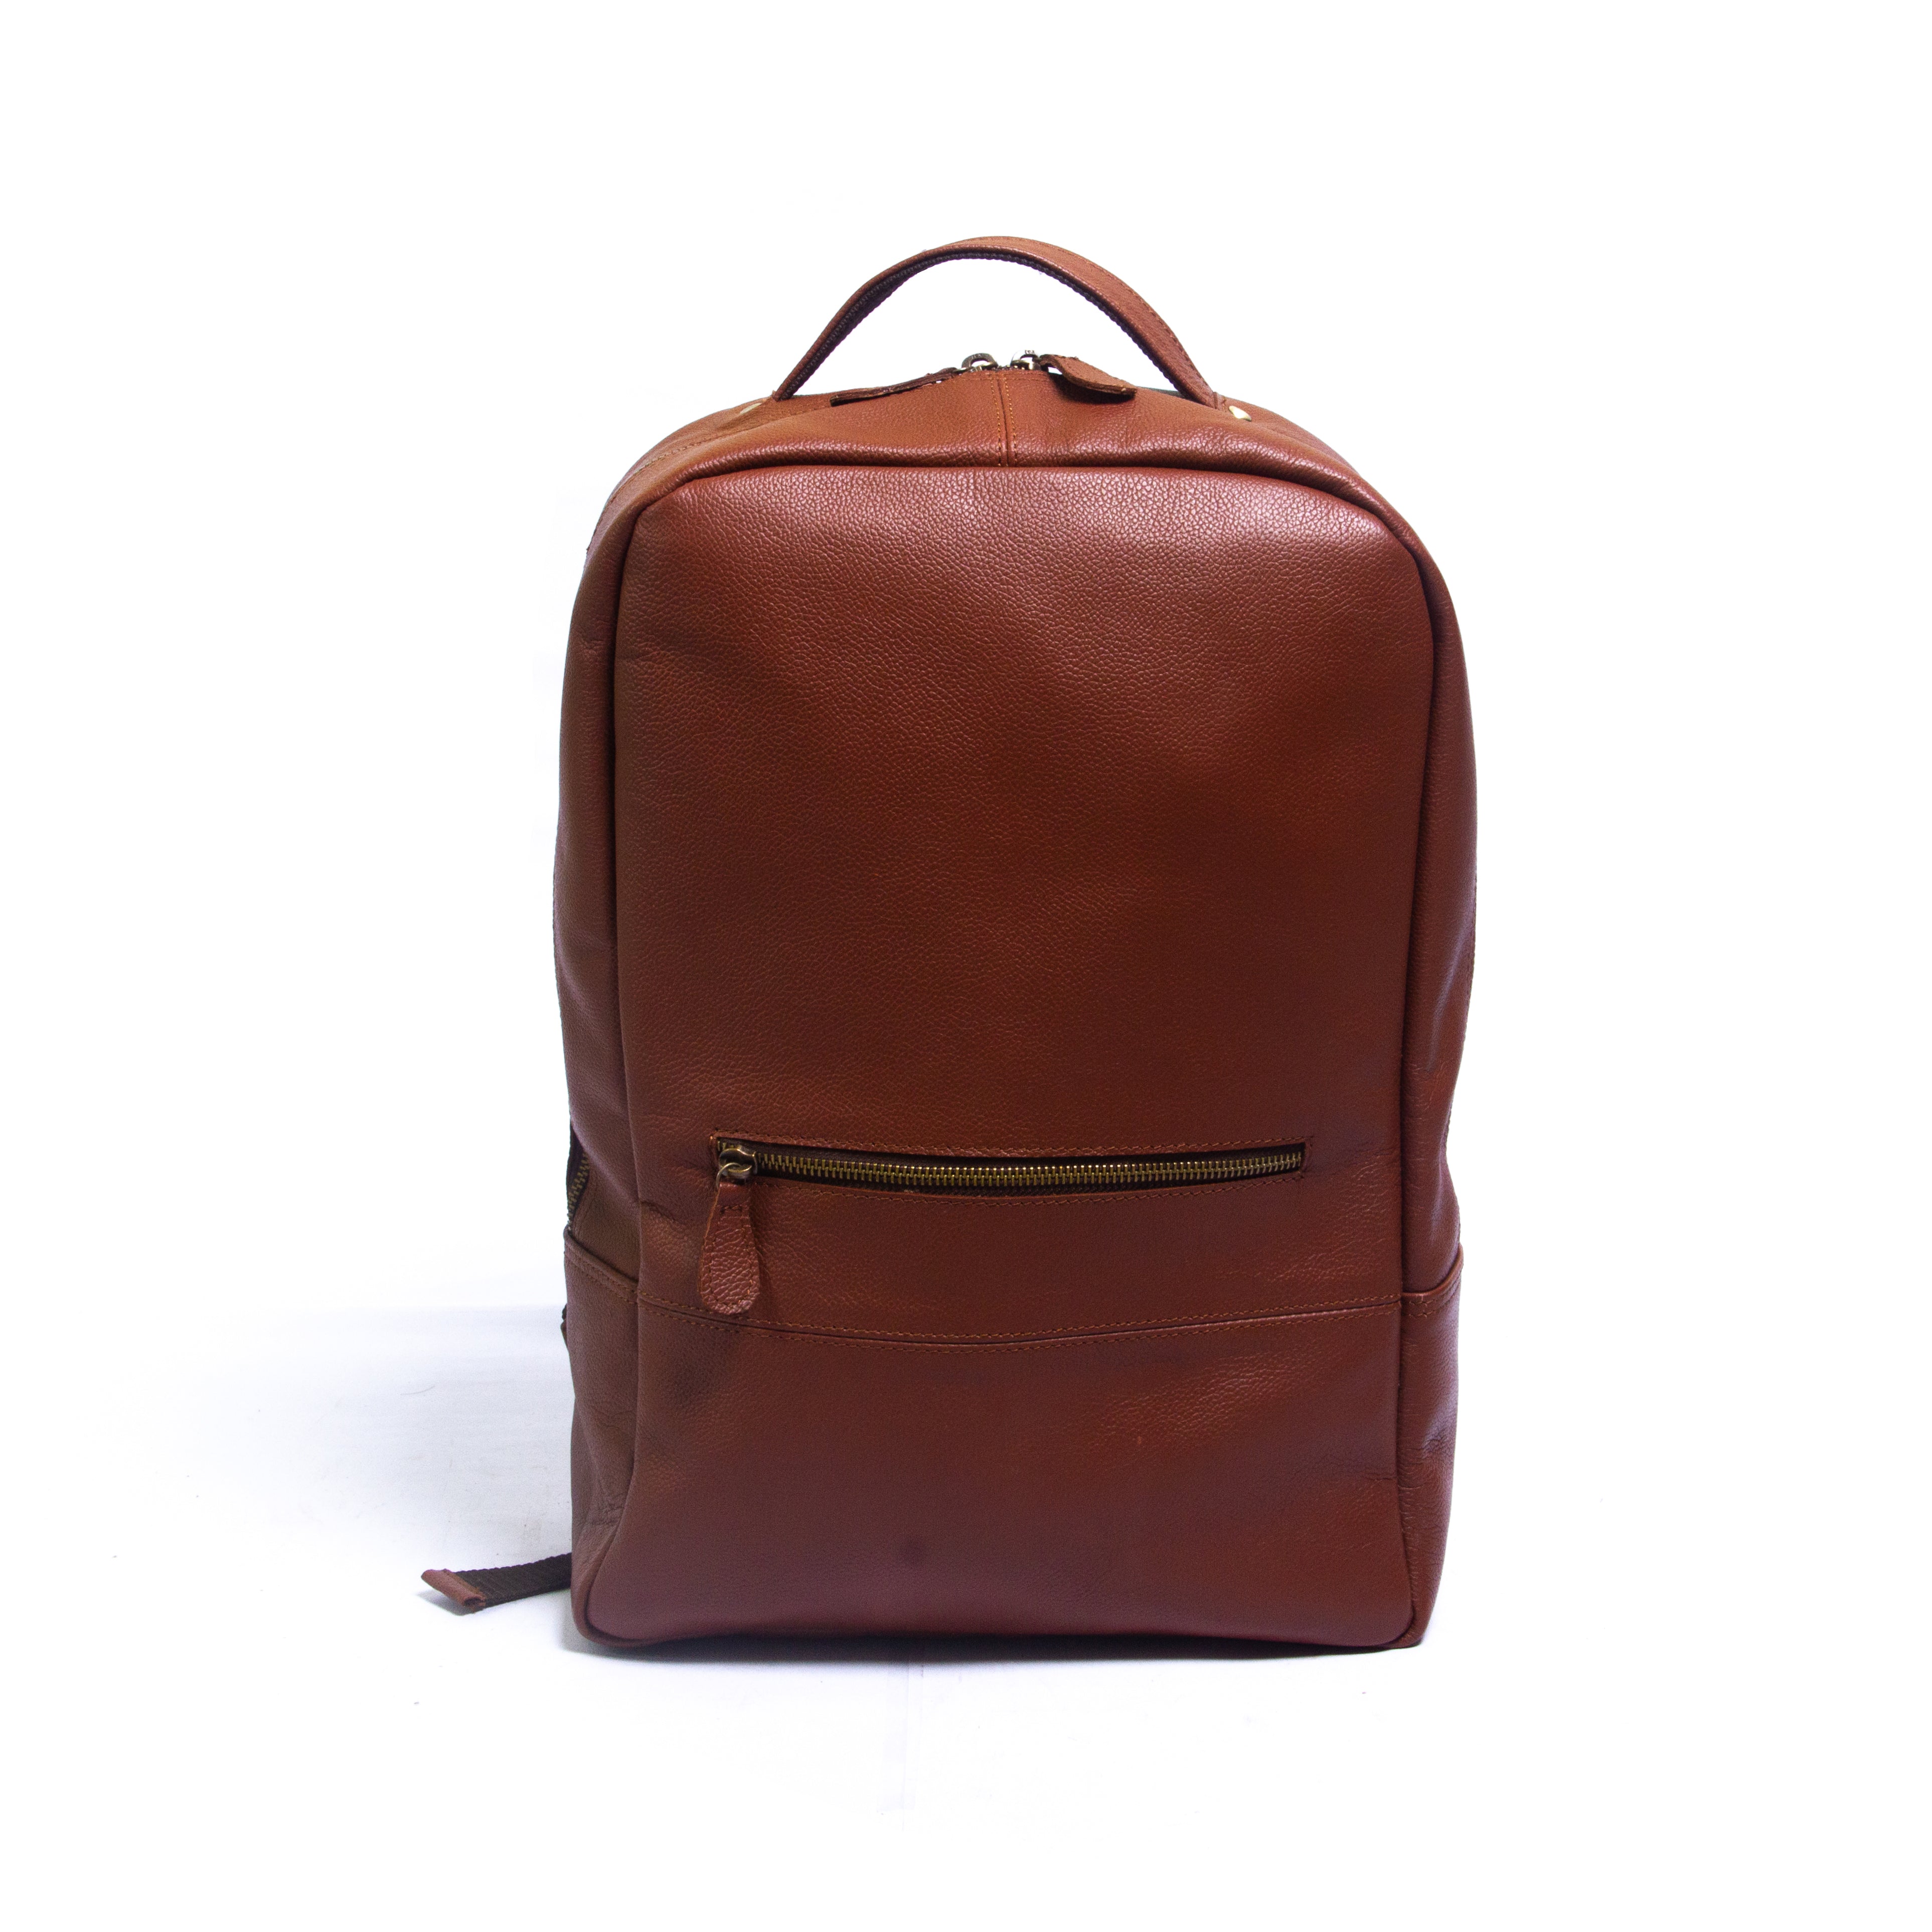 Morrison Leather Backpack - DÖTCH CLUB